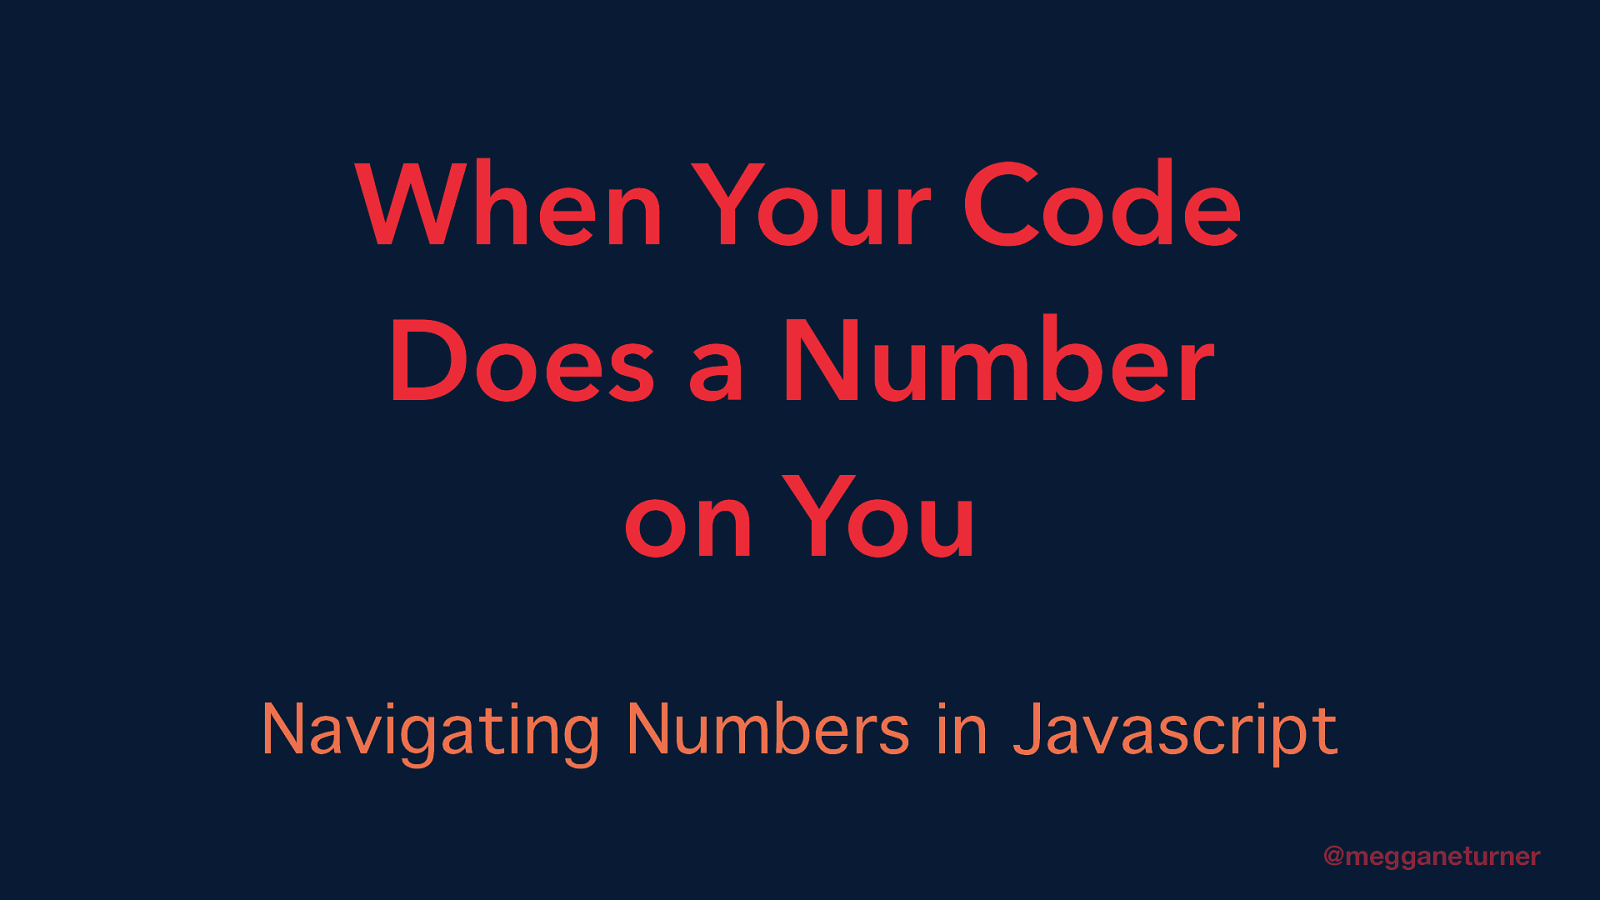 When your code does a number on you: Navigating numbers in JavaScript